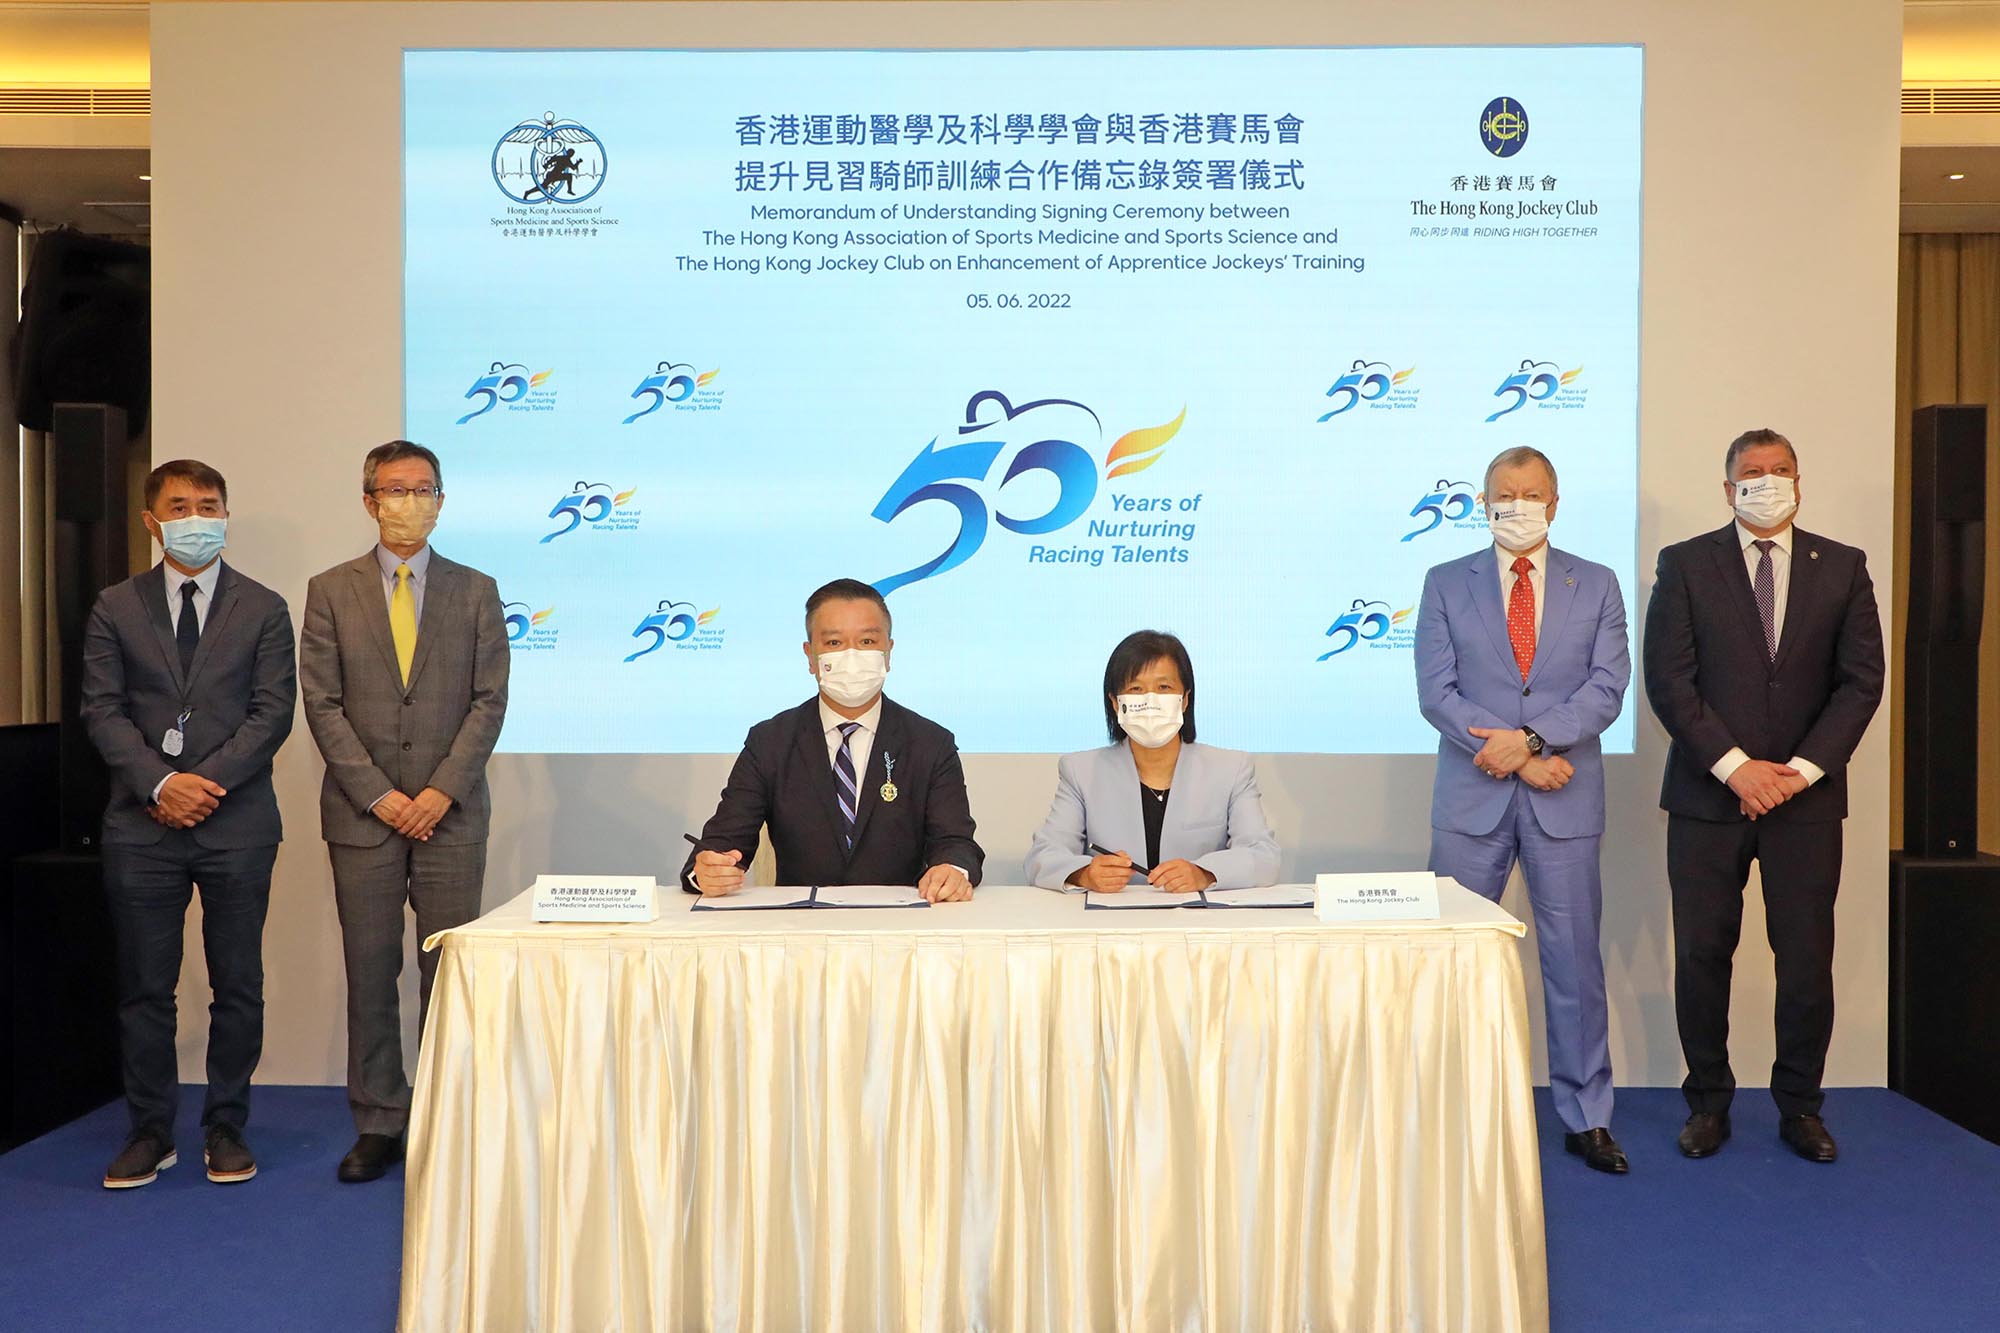 In the presence of Club Chief Executive Officer Winfried Engelbrecht-Bresges (back row, second right); Club Director of Racing Product, Marketing and Sponsorship William Nader (back row, first right); The Chinese University of Hong Kong Medical Centre Executive Director and Chief Executive Officer Prof. Fung Hong (back row, second left) and The Hong Kong Association of Sports Medicine and Sports Science (HKASMSS) Advisory board member Dr. Gary Mak (back row, first left), Club’s Racing Talent Training Centre Executive Manager and Headmistress of Apprentice Jockeys’ School Amy Chan (front row, right) signs the Memorandum of Understanding on Enhancement of Apprentice Jockeys’ Training with HKASMSS President Prof. Patrick Yung (front row, left).